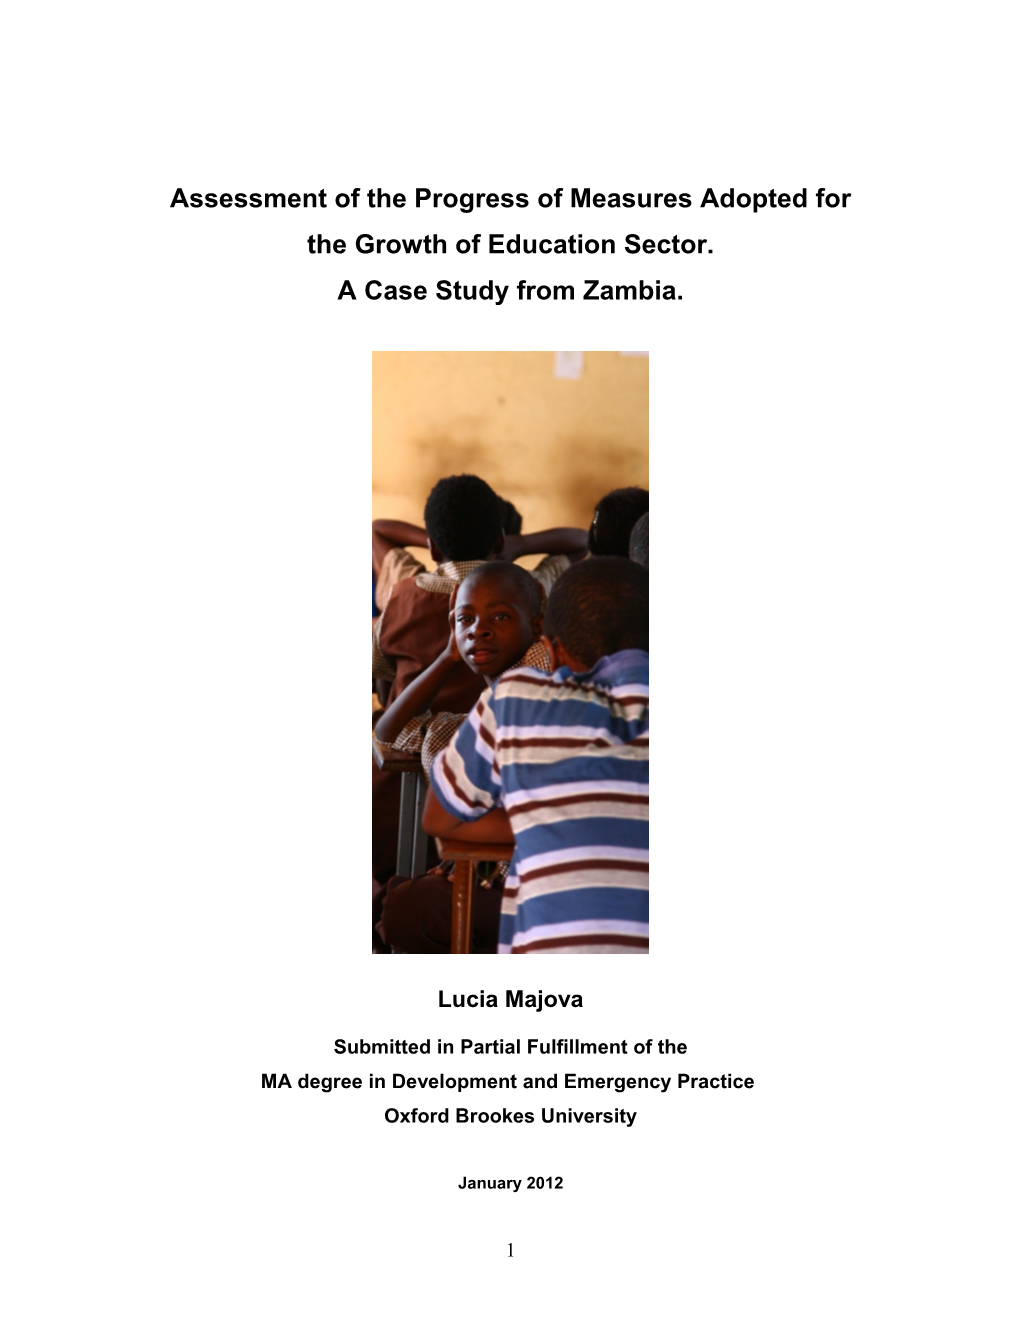 Assessment of the Progress of Measures Adopted for the Growth of Education Sector